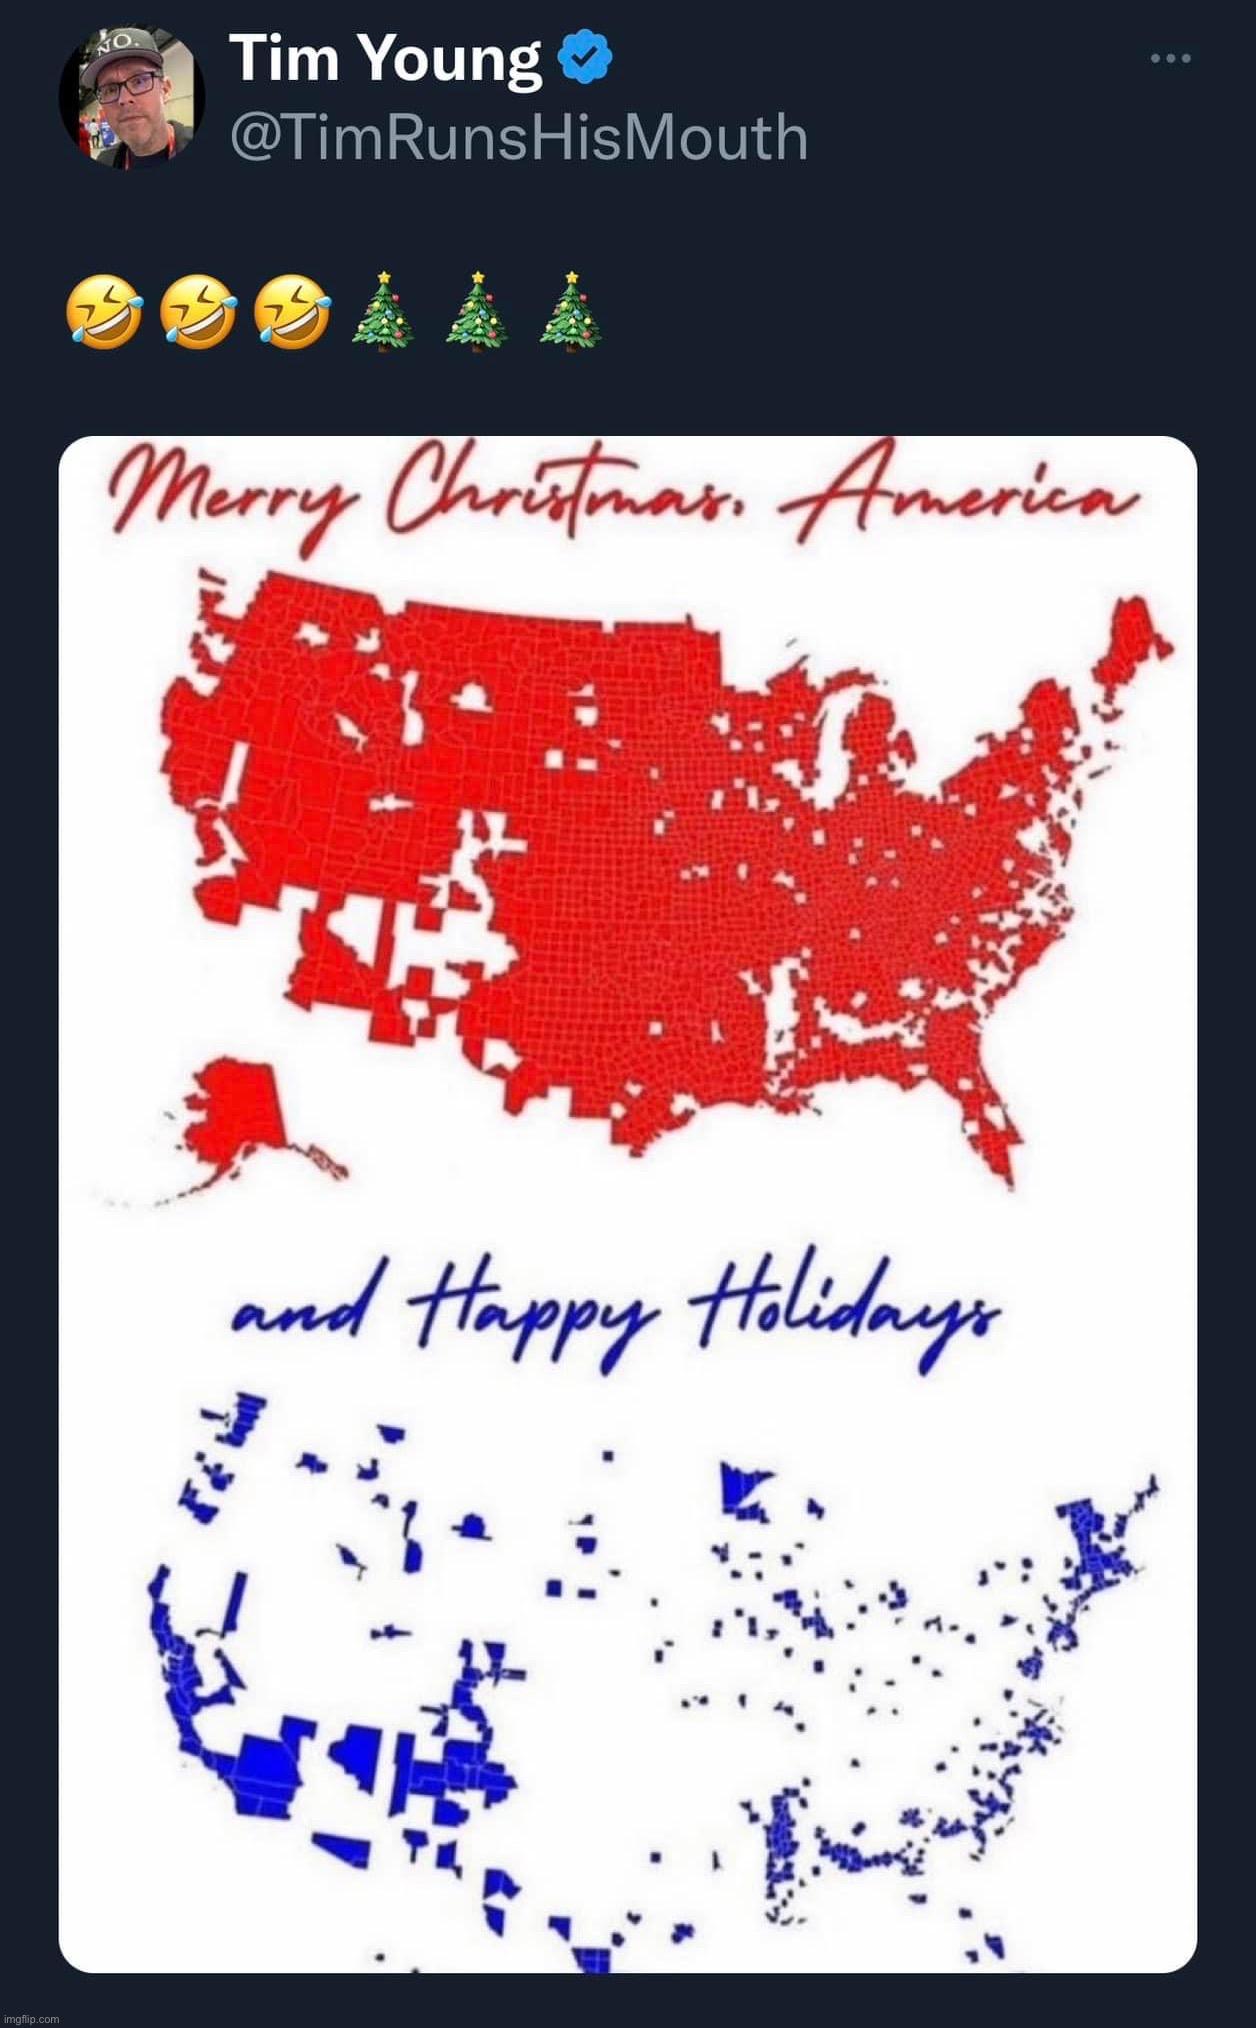 Wishing a happy December-whatever to all of you, even you libtrads. #waronchristmas #waronwaronchristmas | image tagged in merry christmas america and happy holidays,merry christmas,war on christmas,war on the war on christmas,america,'murica | made w/ Imgflip meme maker